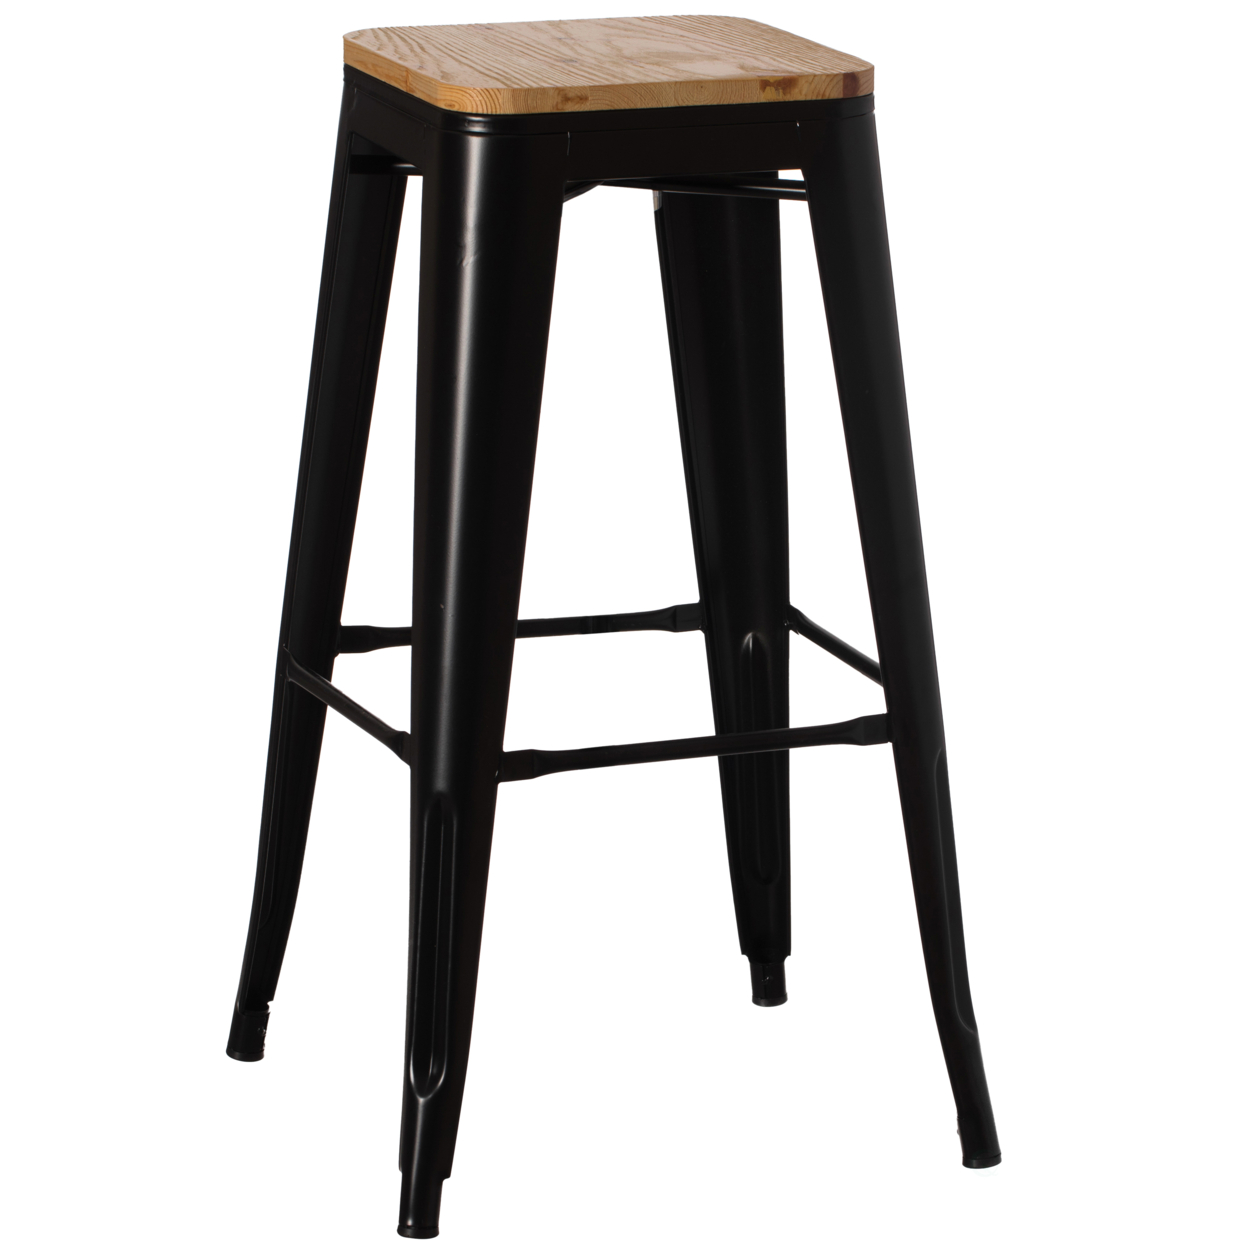 Decorative Accent Bar Stool For Indoor And Outdoor, Wooden Brown And Metal Black - Medium